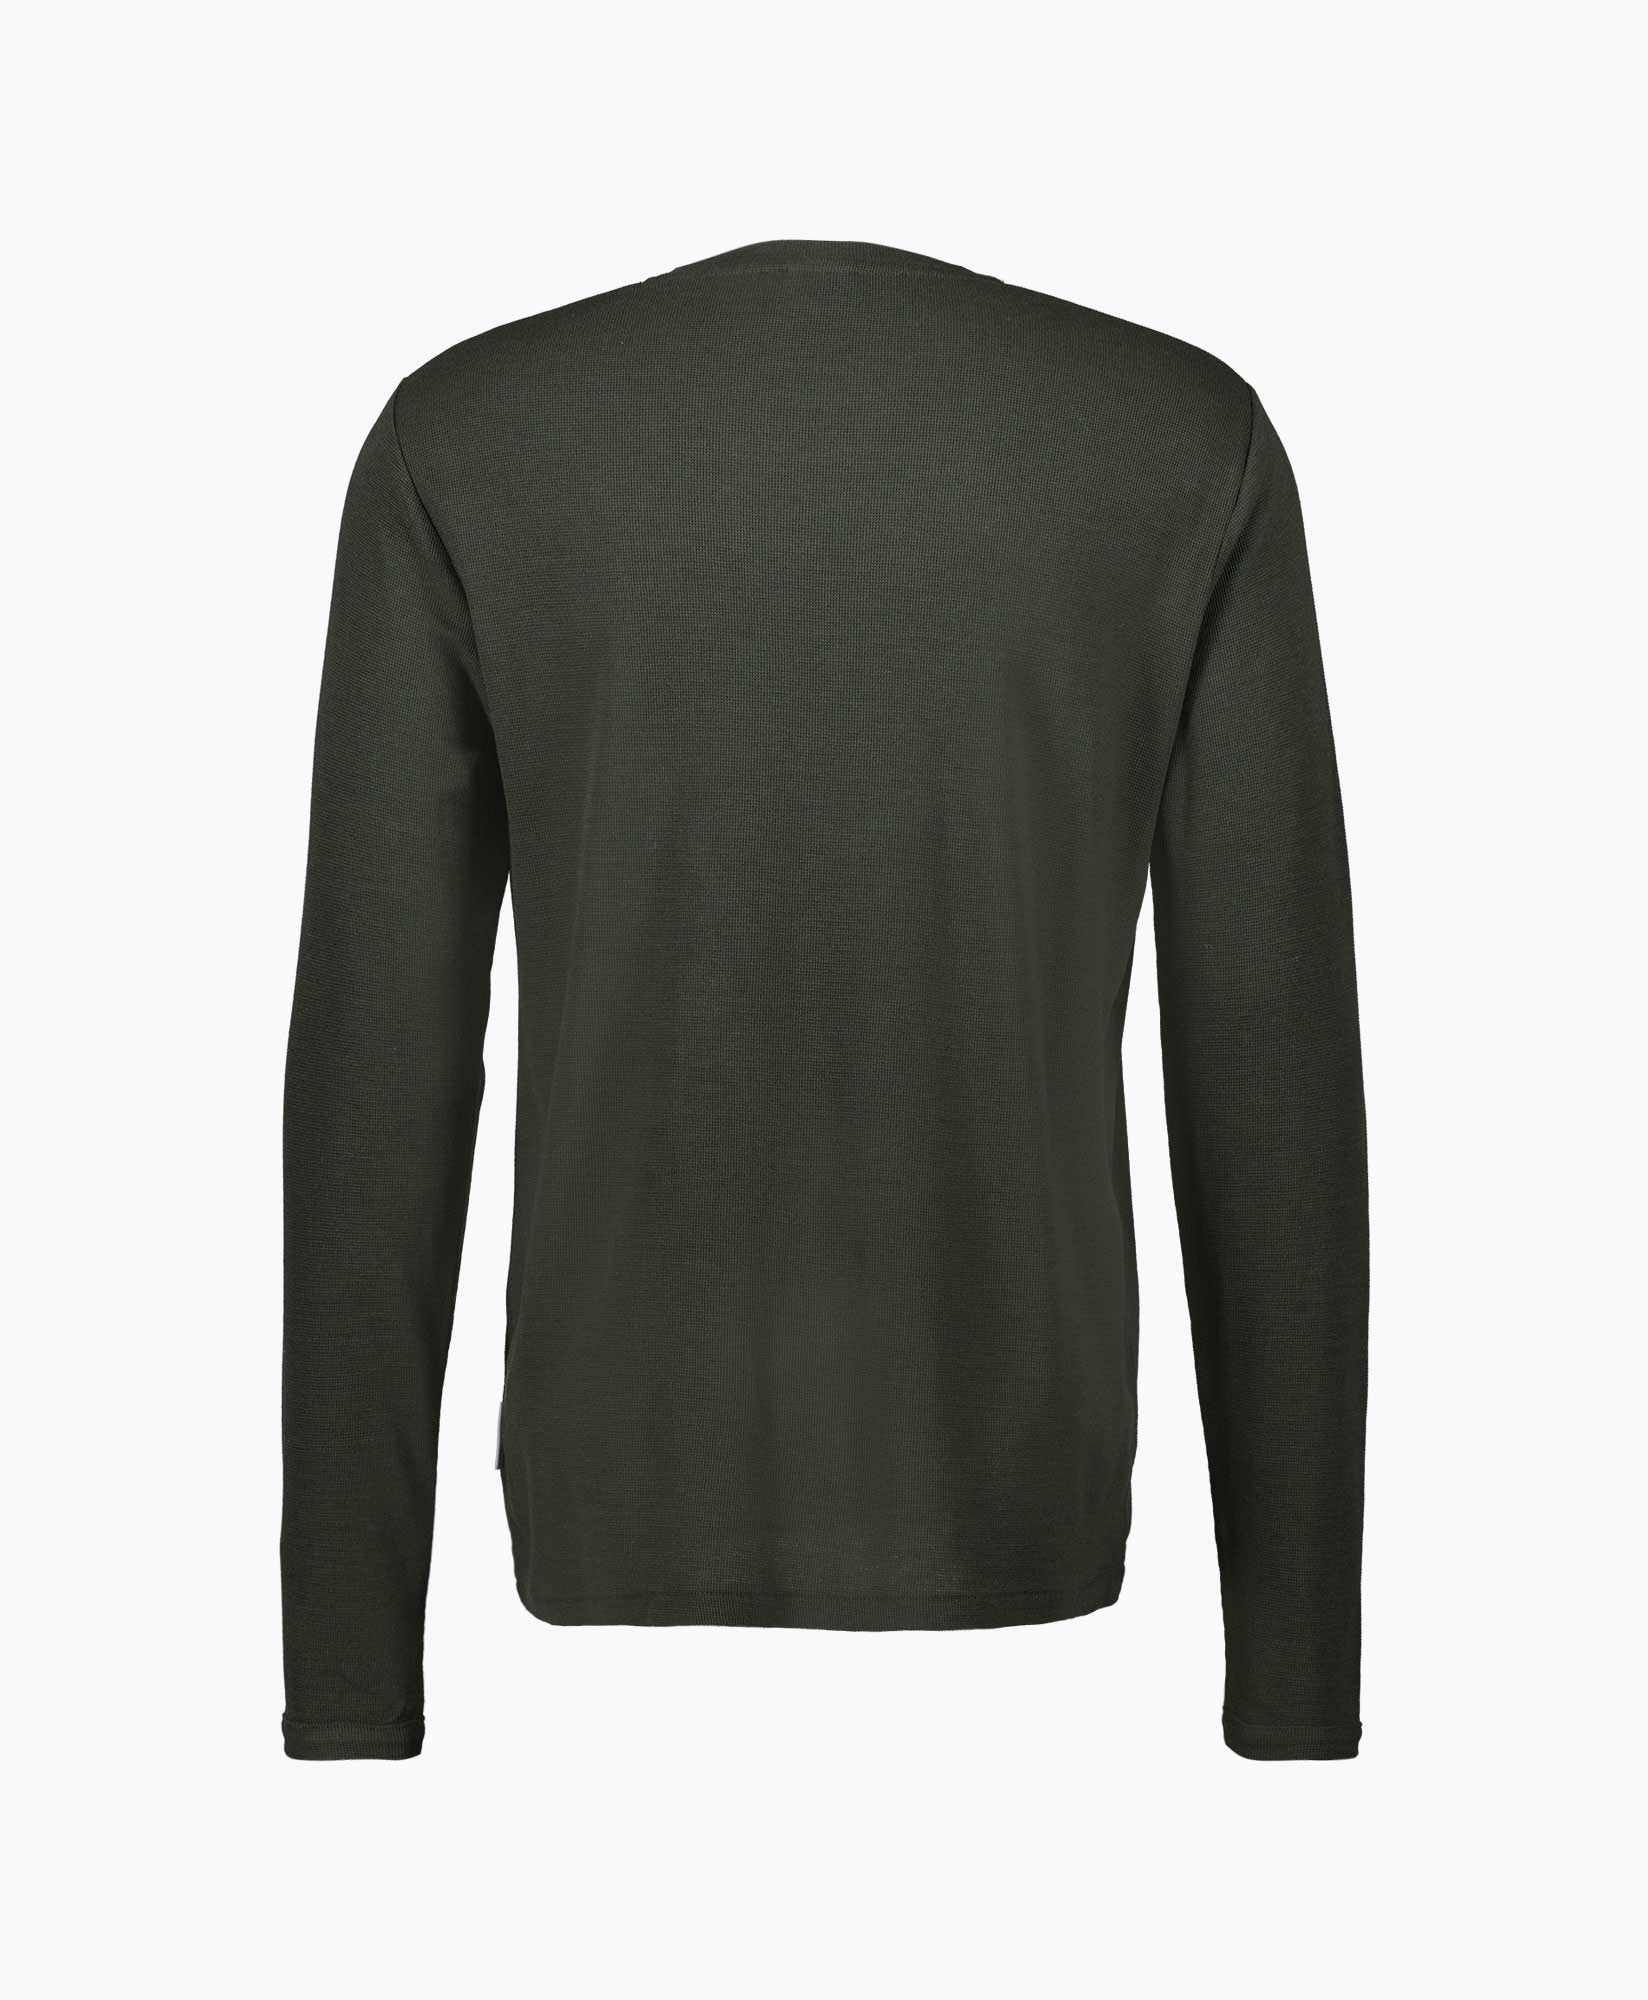 Nn07 Pullover Clive Donker Bruin